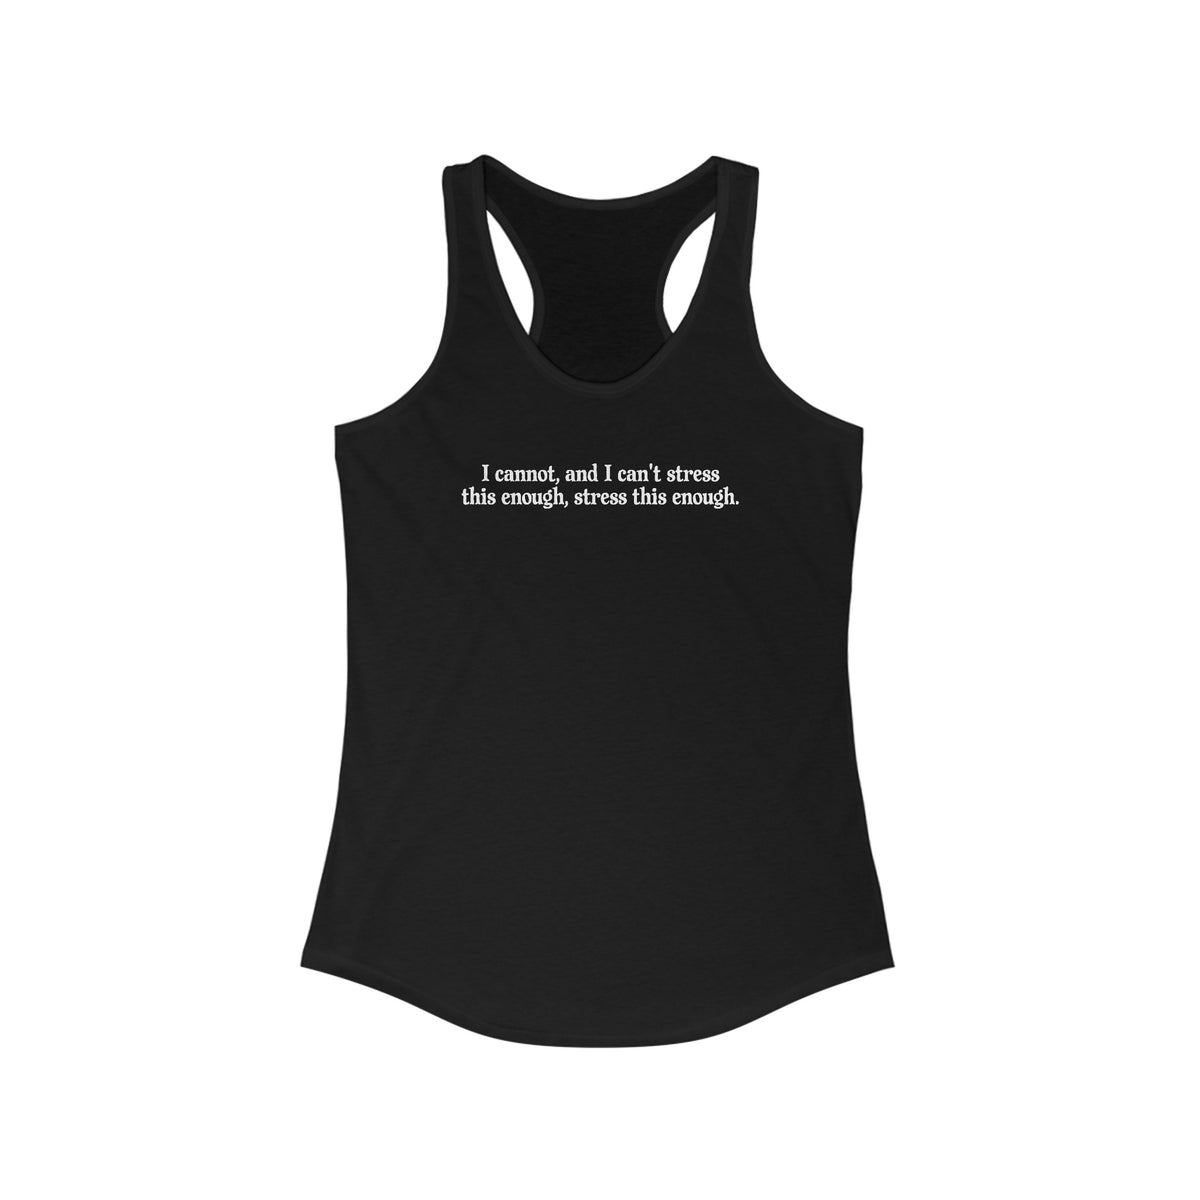 I Cannot And I Can't Stress This Enough - Women's Racerback Tank